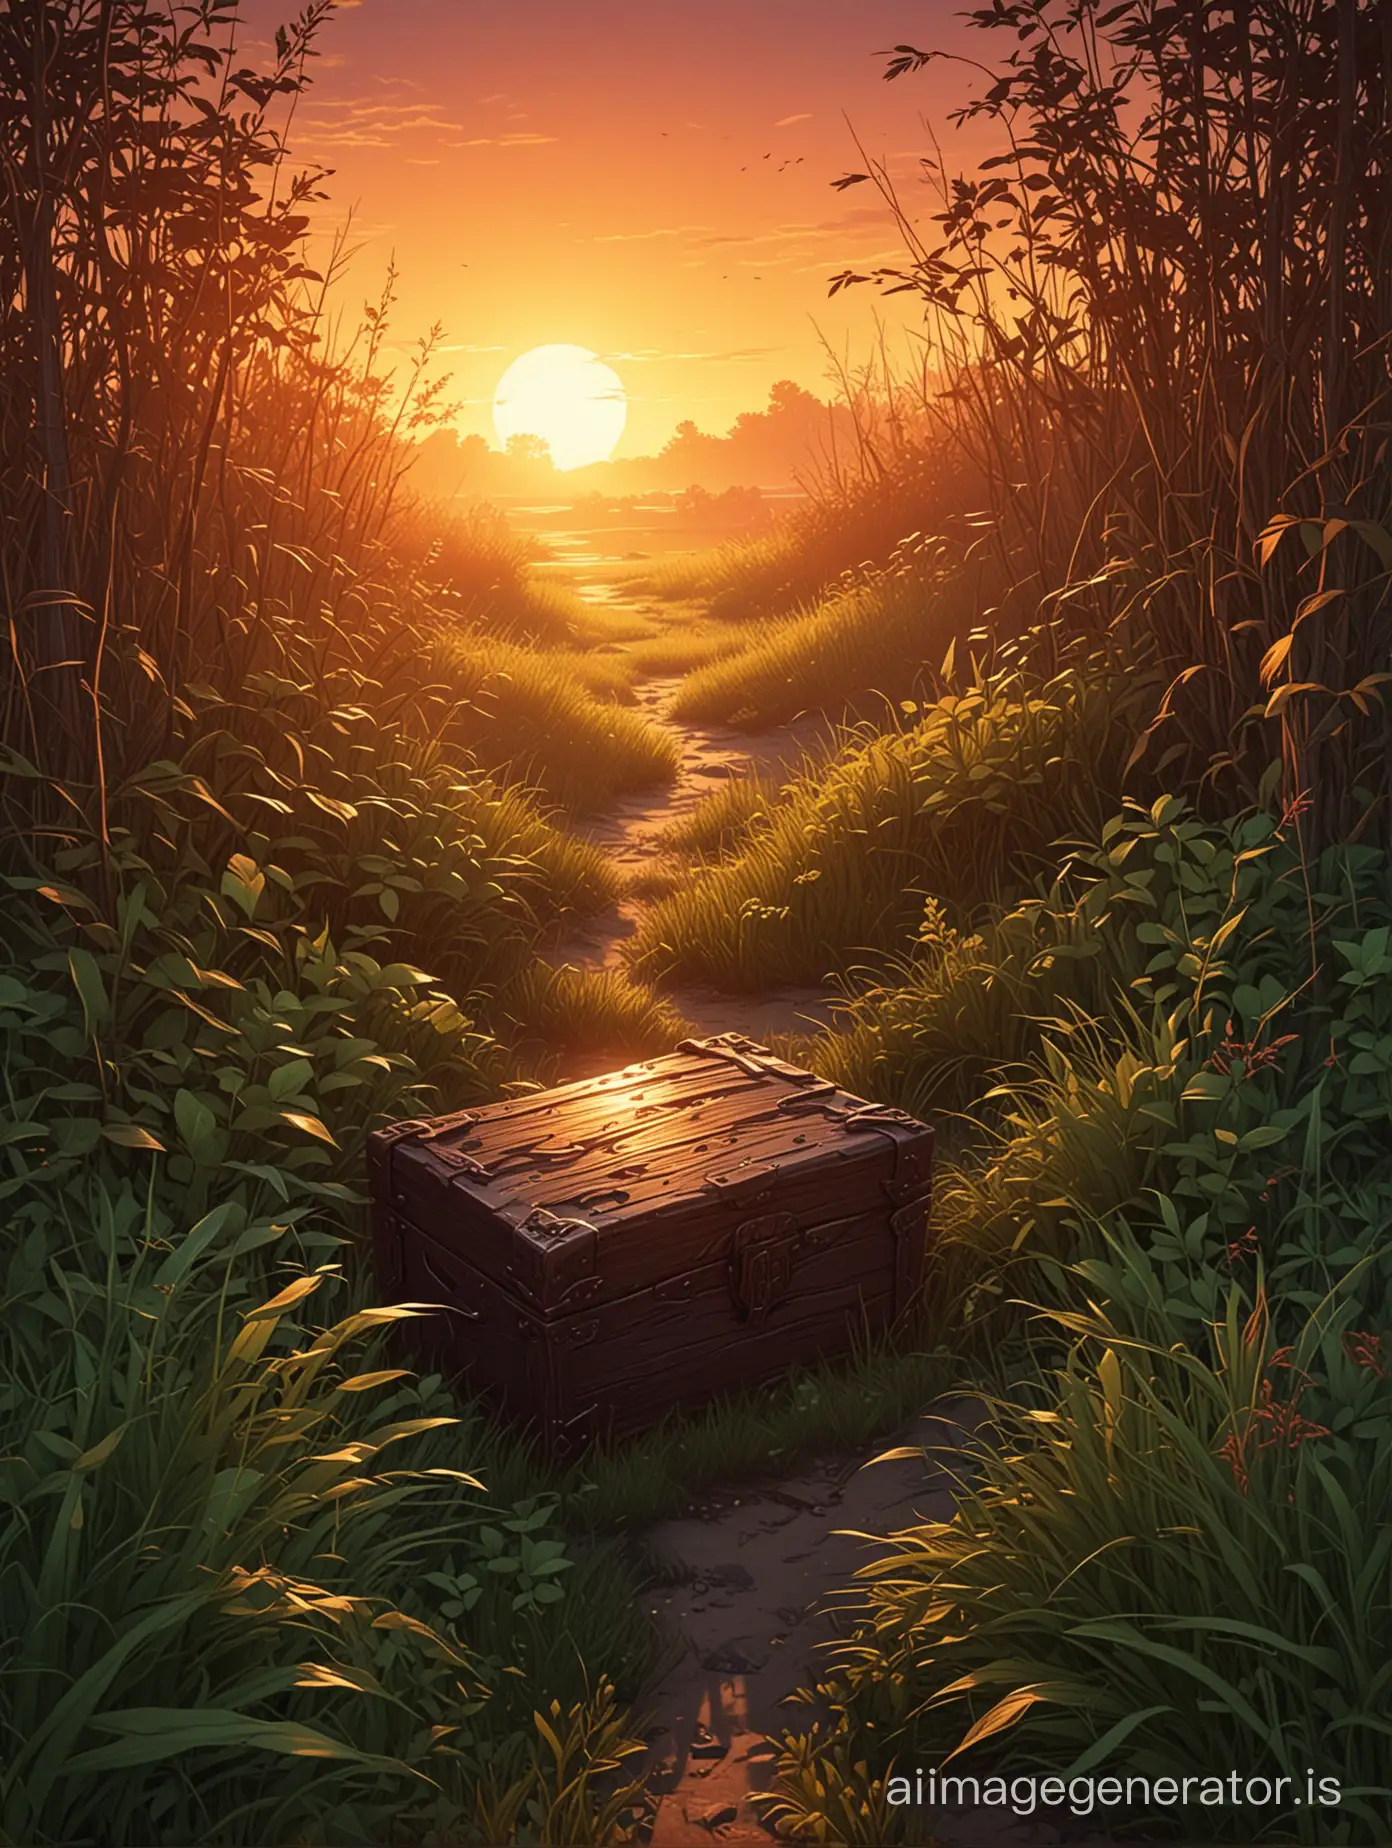 sunset time, half-buried chest partially visible in the thickets of grass (in the style of RPG games) amid dense vegetation and forest path 2D vector graphics background